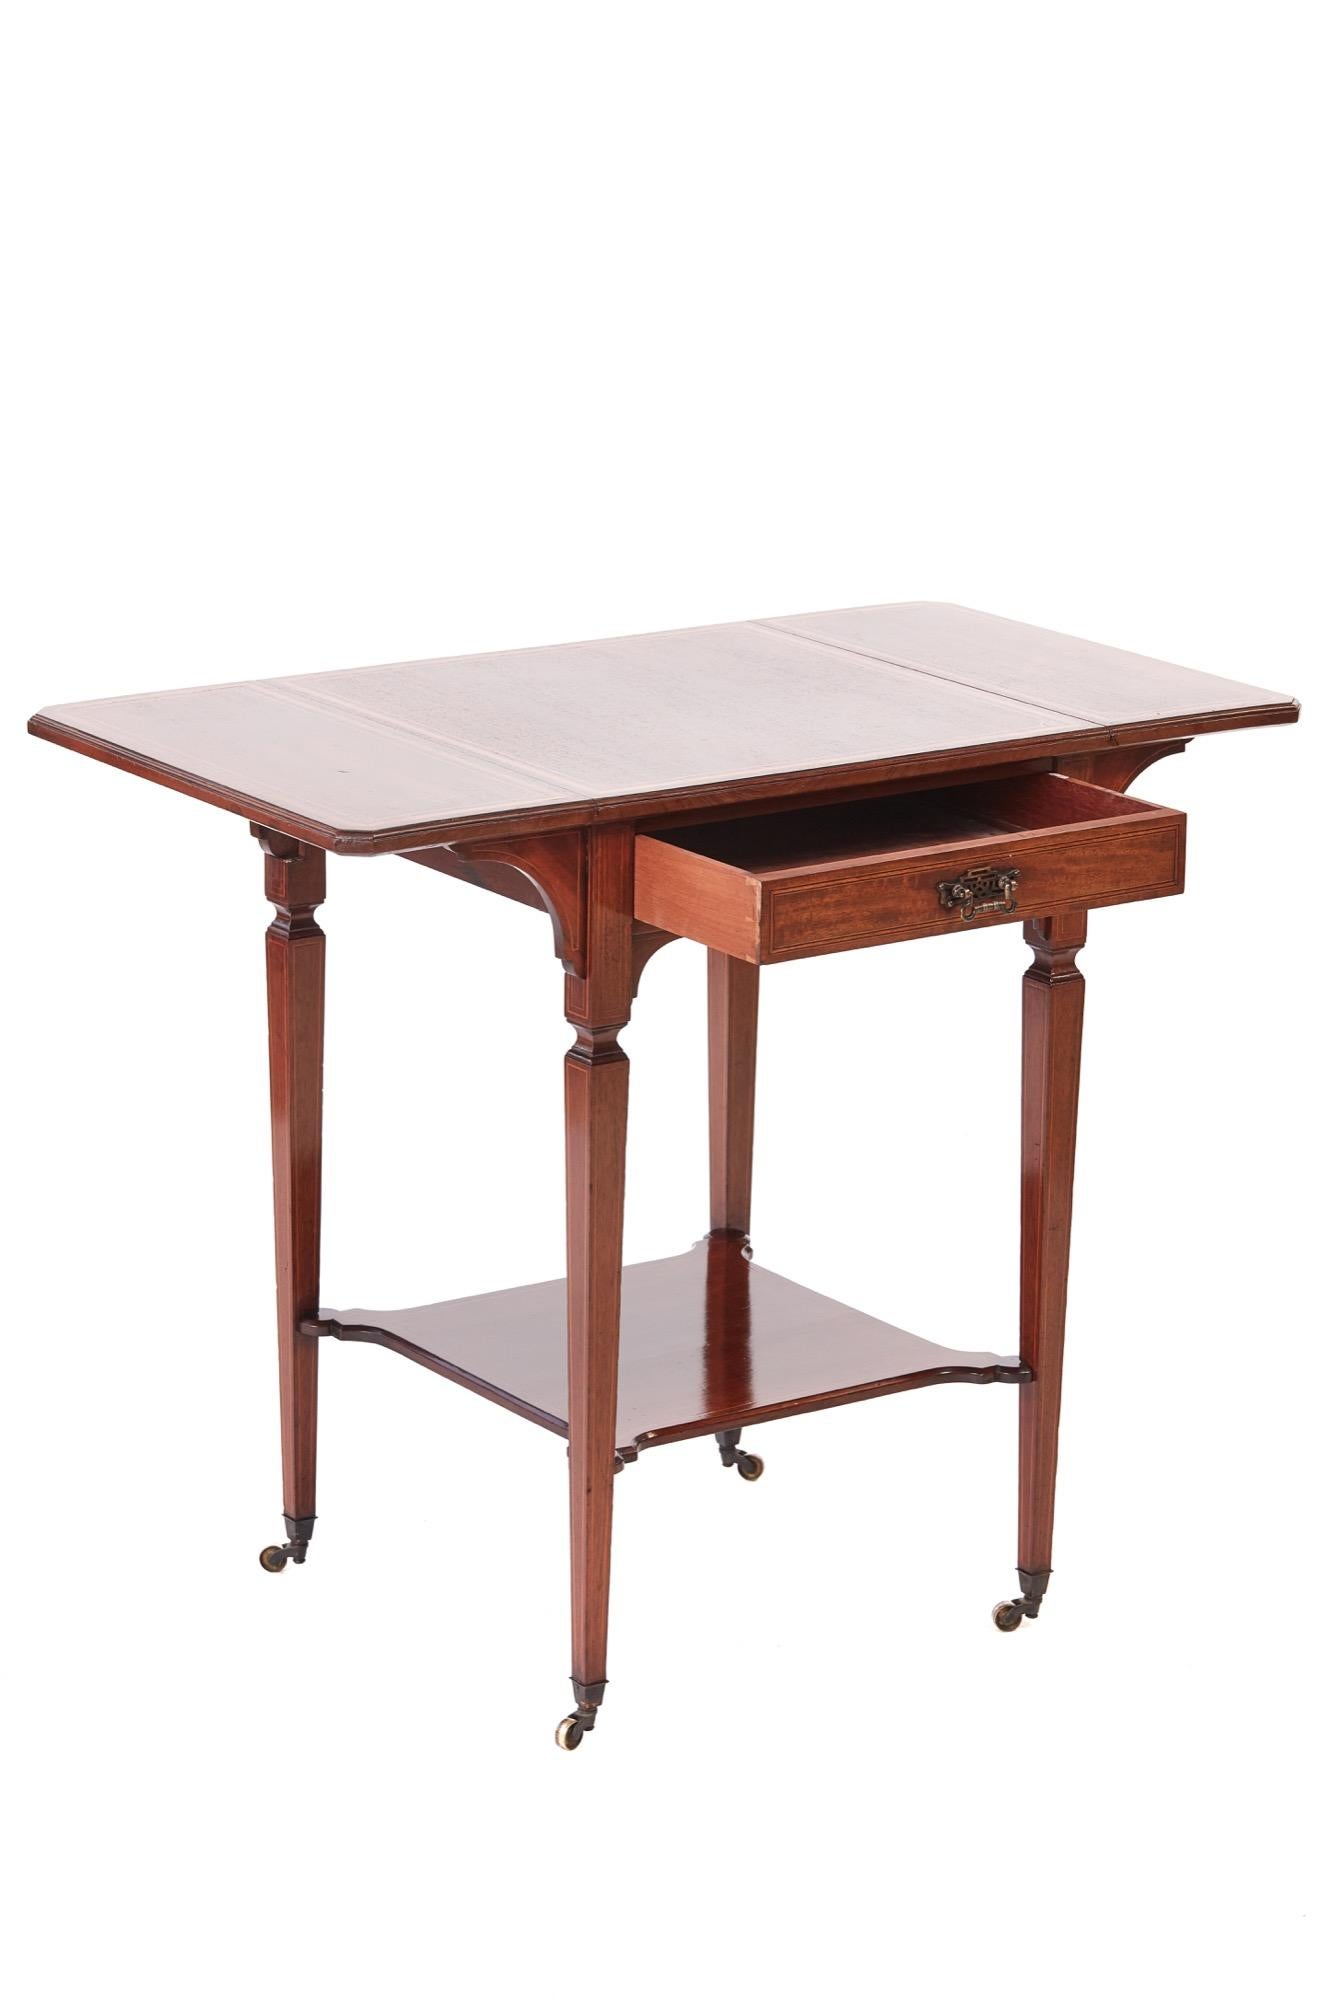 Fine quality Edwardian antique inlaid mahogany occasional / lamp table having a lovely mahogany top with two drop leaves and satinwood inlay, one frieze drawer with original handle, standing on four square elegant tapering legs with original brass